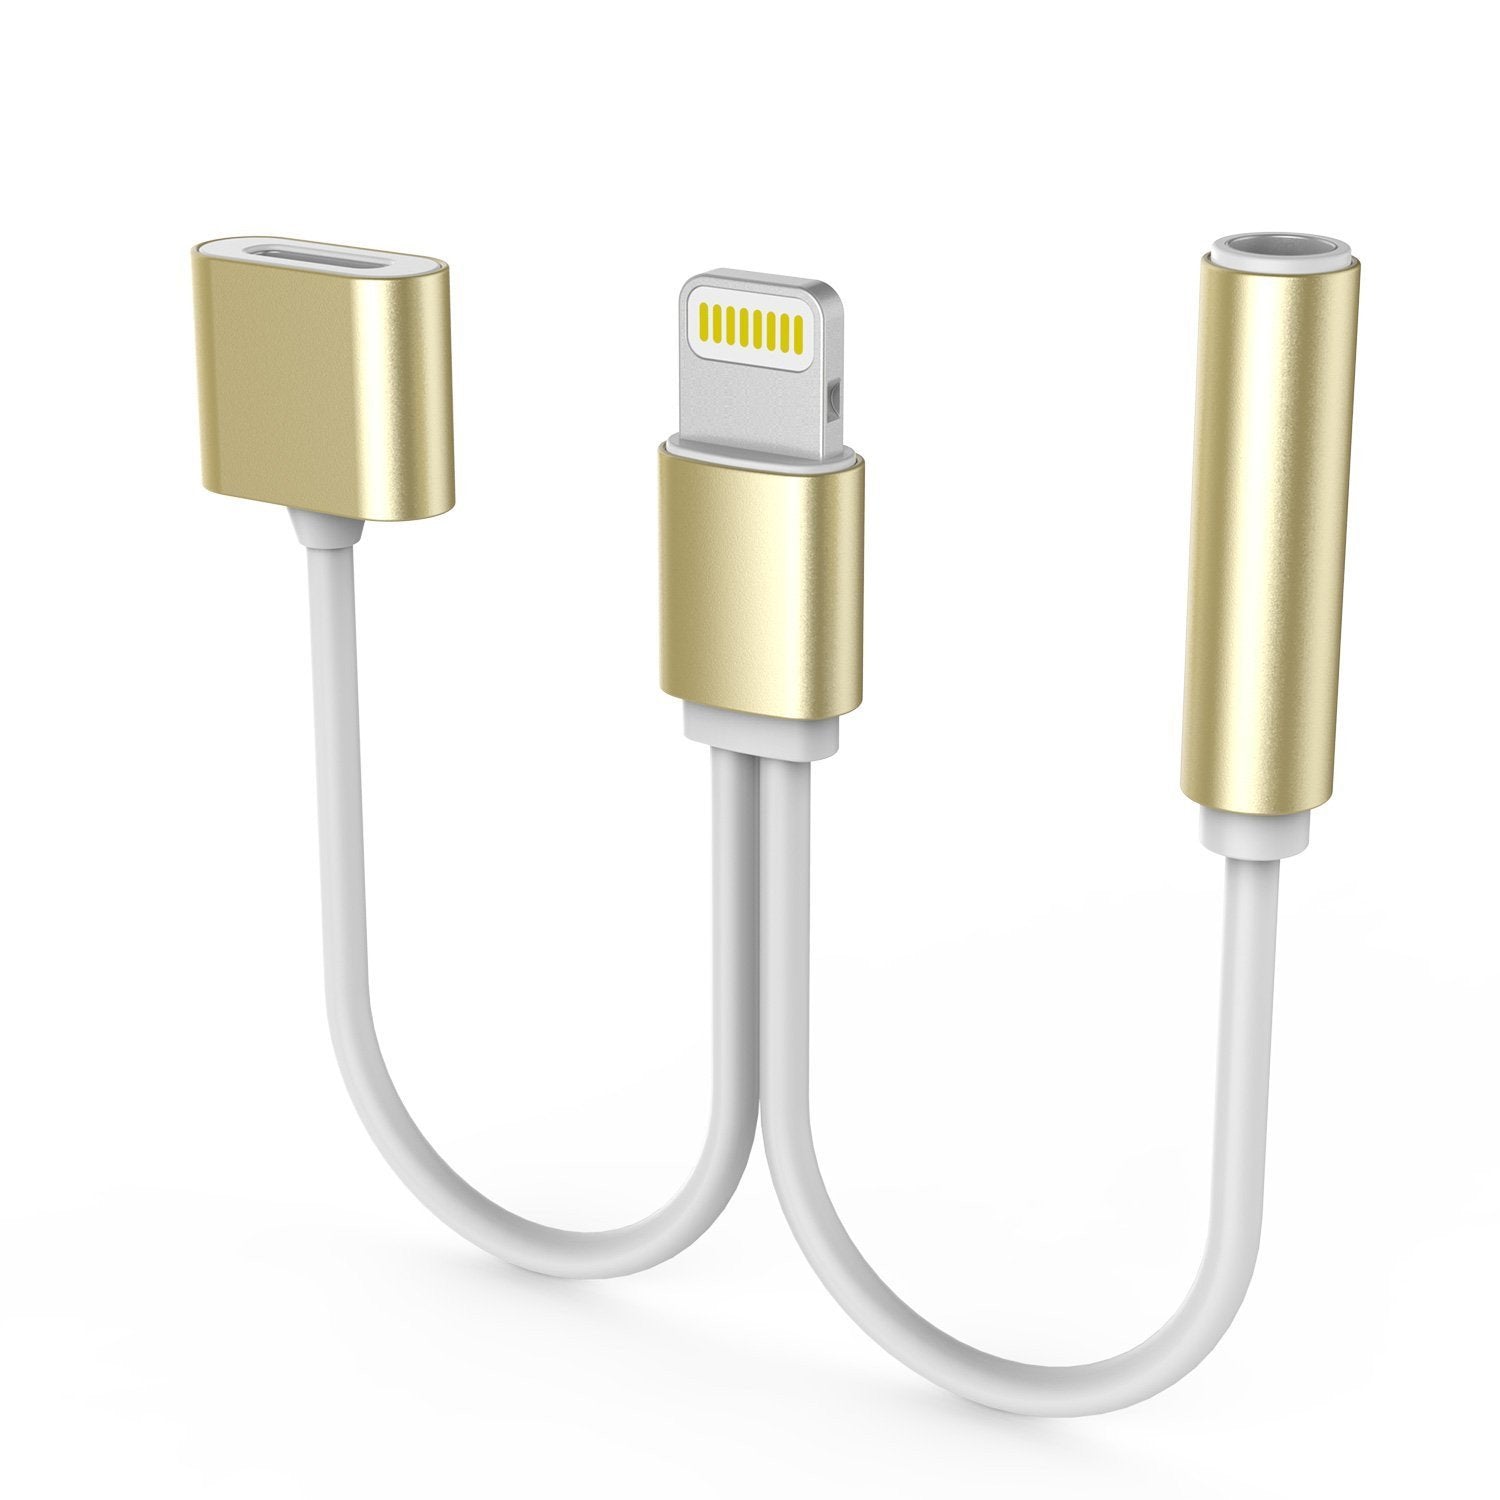 PUNKZAP Lightning Adapter Cable 2 in 1 Splitter Charger with 3.5mm Earphone AUX Jack|Charge & Listen to your Apple iPhone X/8/7/6s/6/5s/5 8+/7+/6+/6S+ Plus [GOLD]